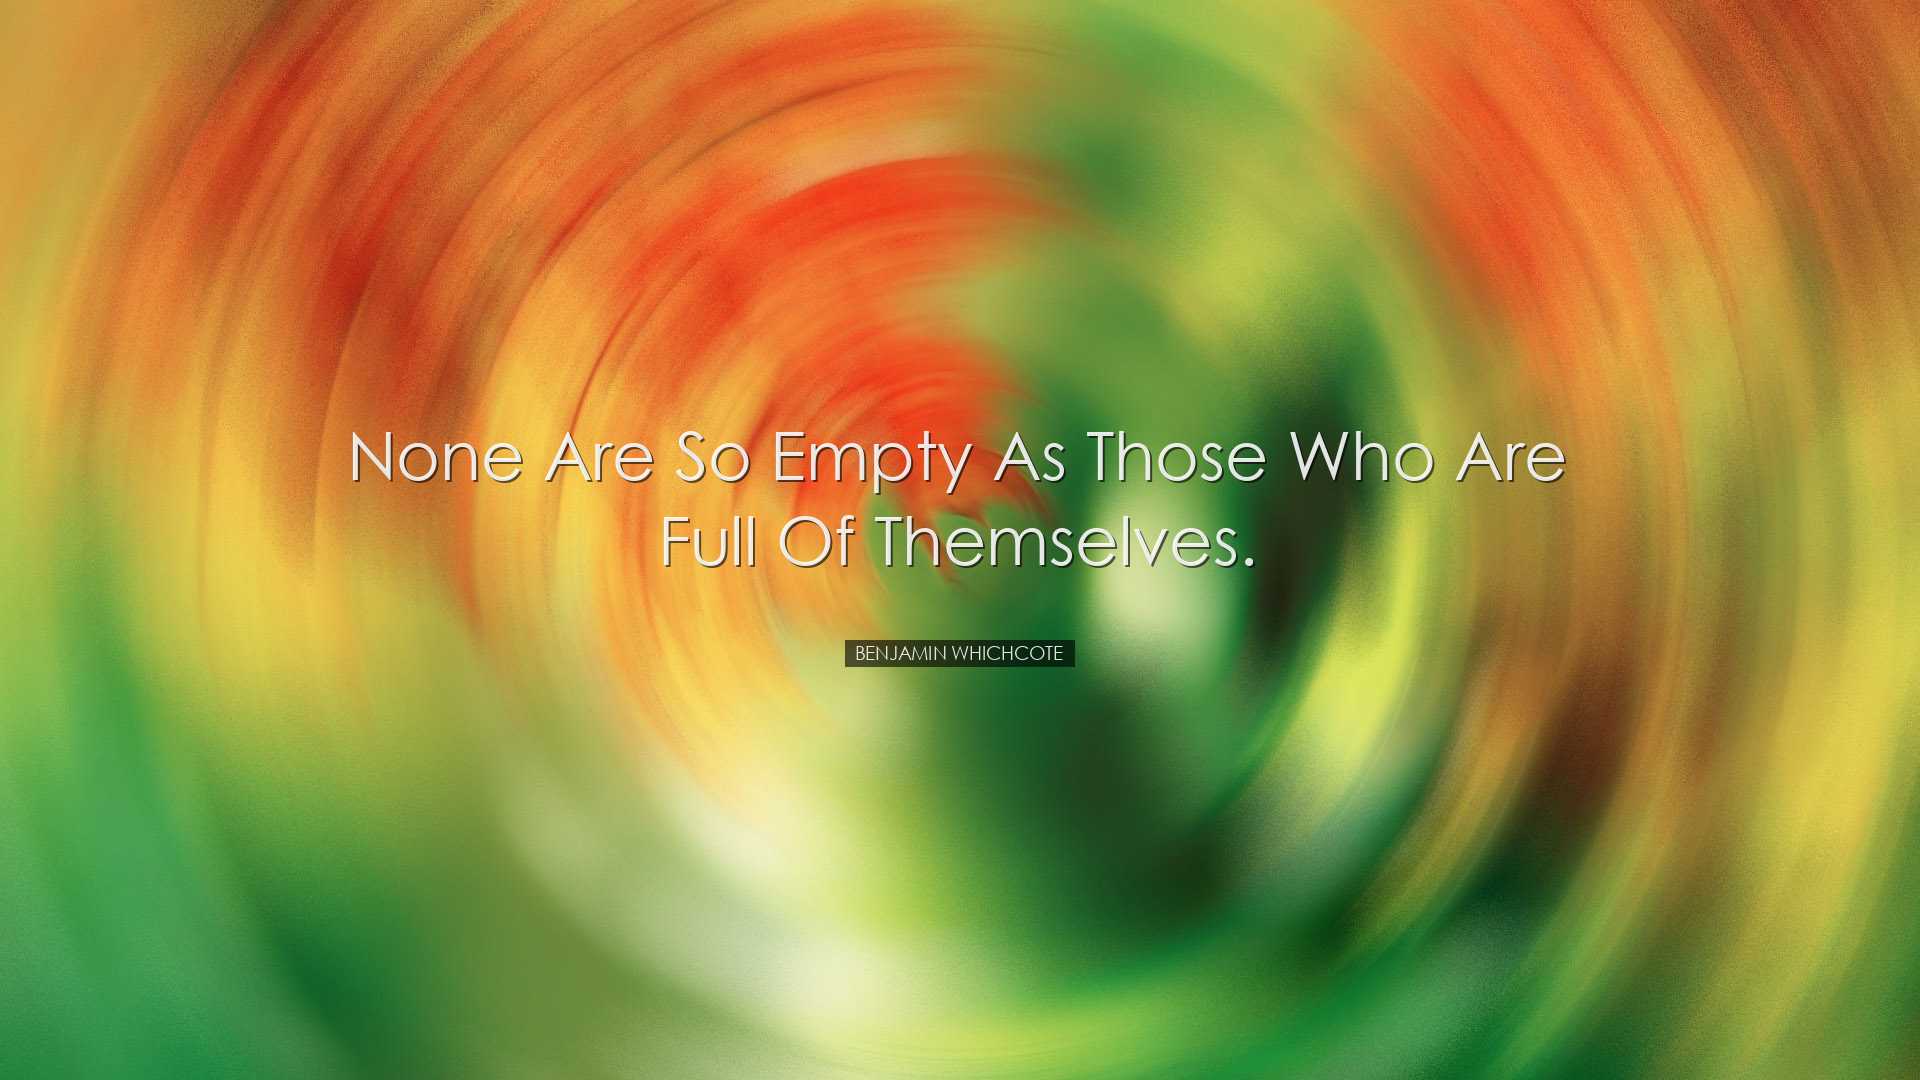 None are so empty as those who are full of themselves. - Benjamin